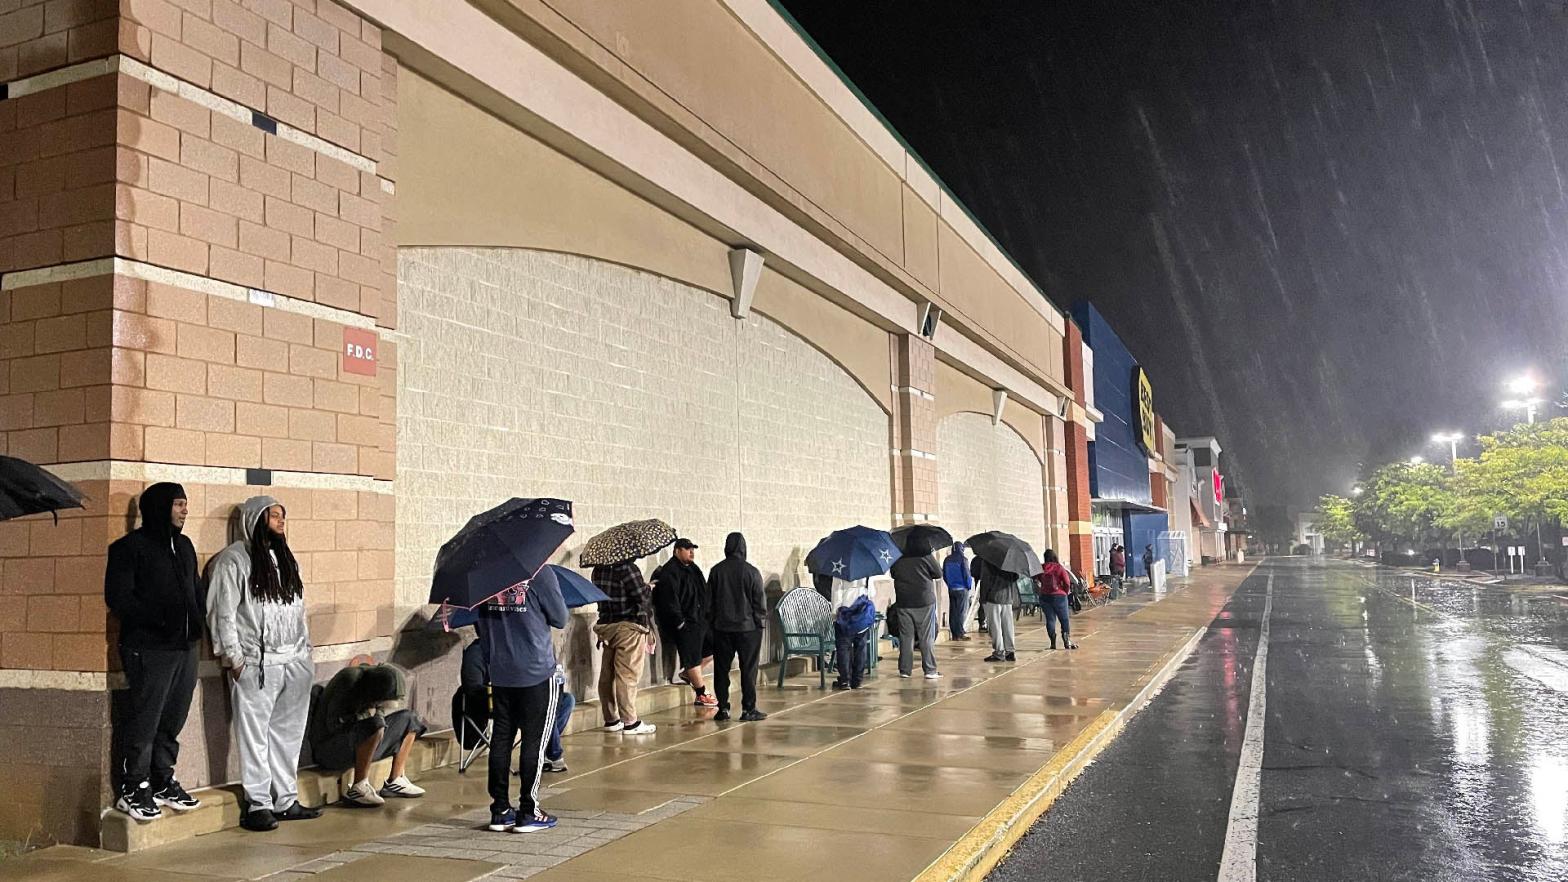 Eager gamers weather the rain at a Washington, D.C., Best Buy before sunrise. (Photo: NathanBacaTV / Twitter, Other)